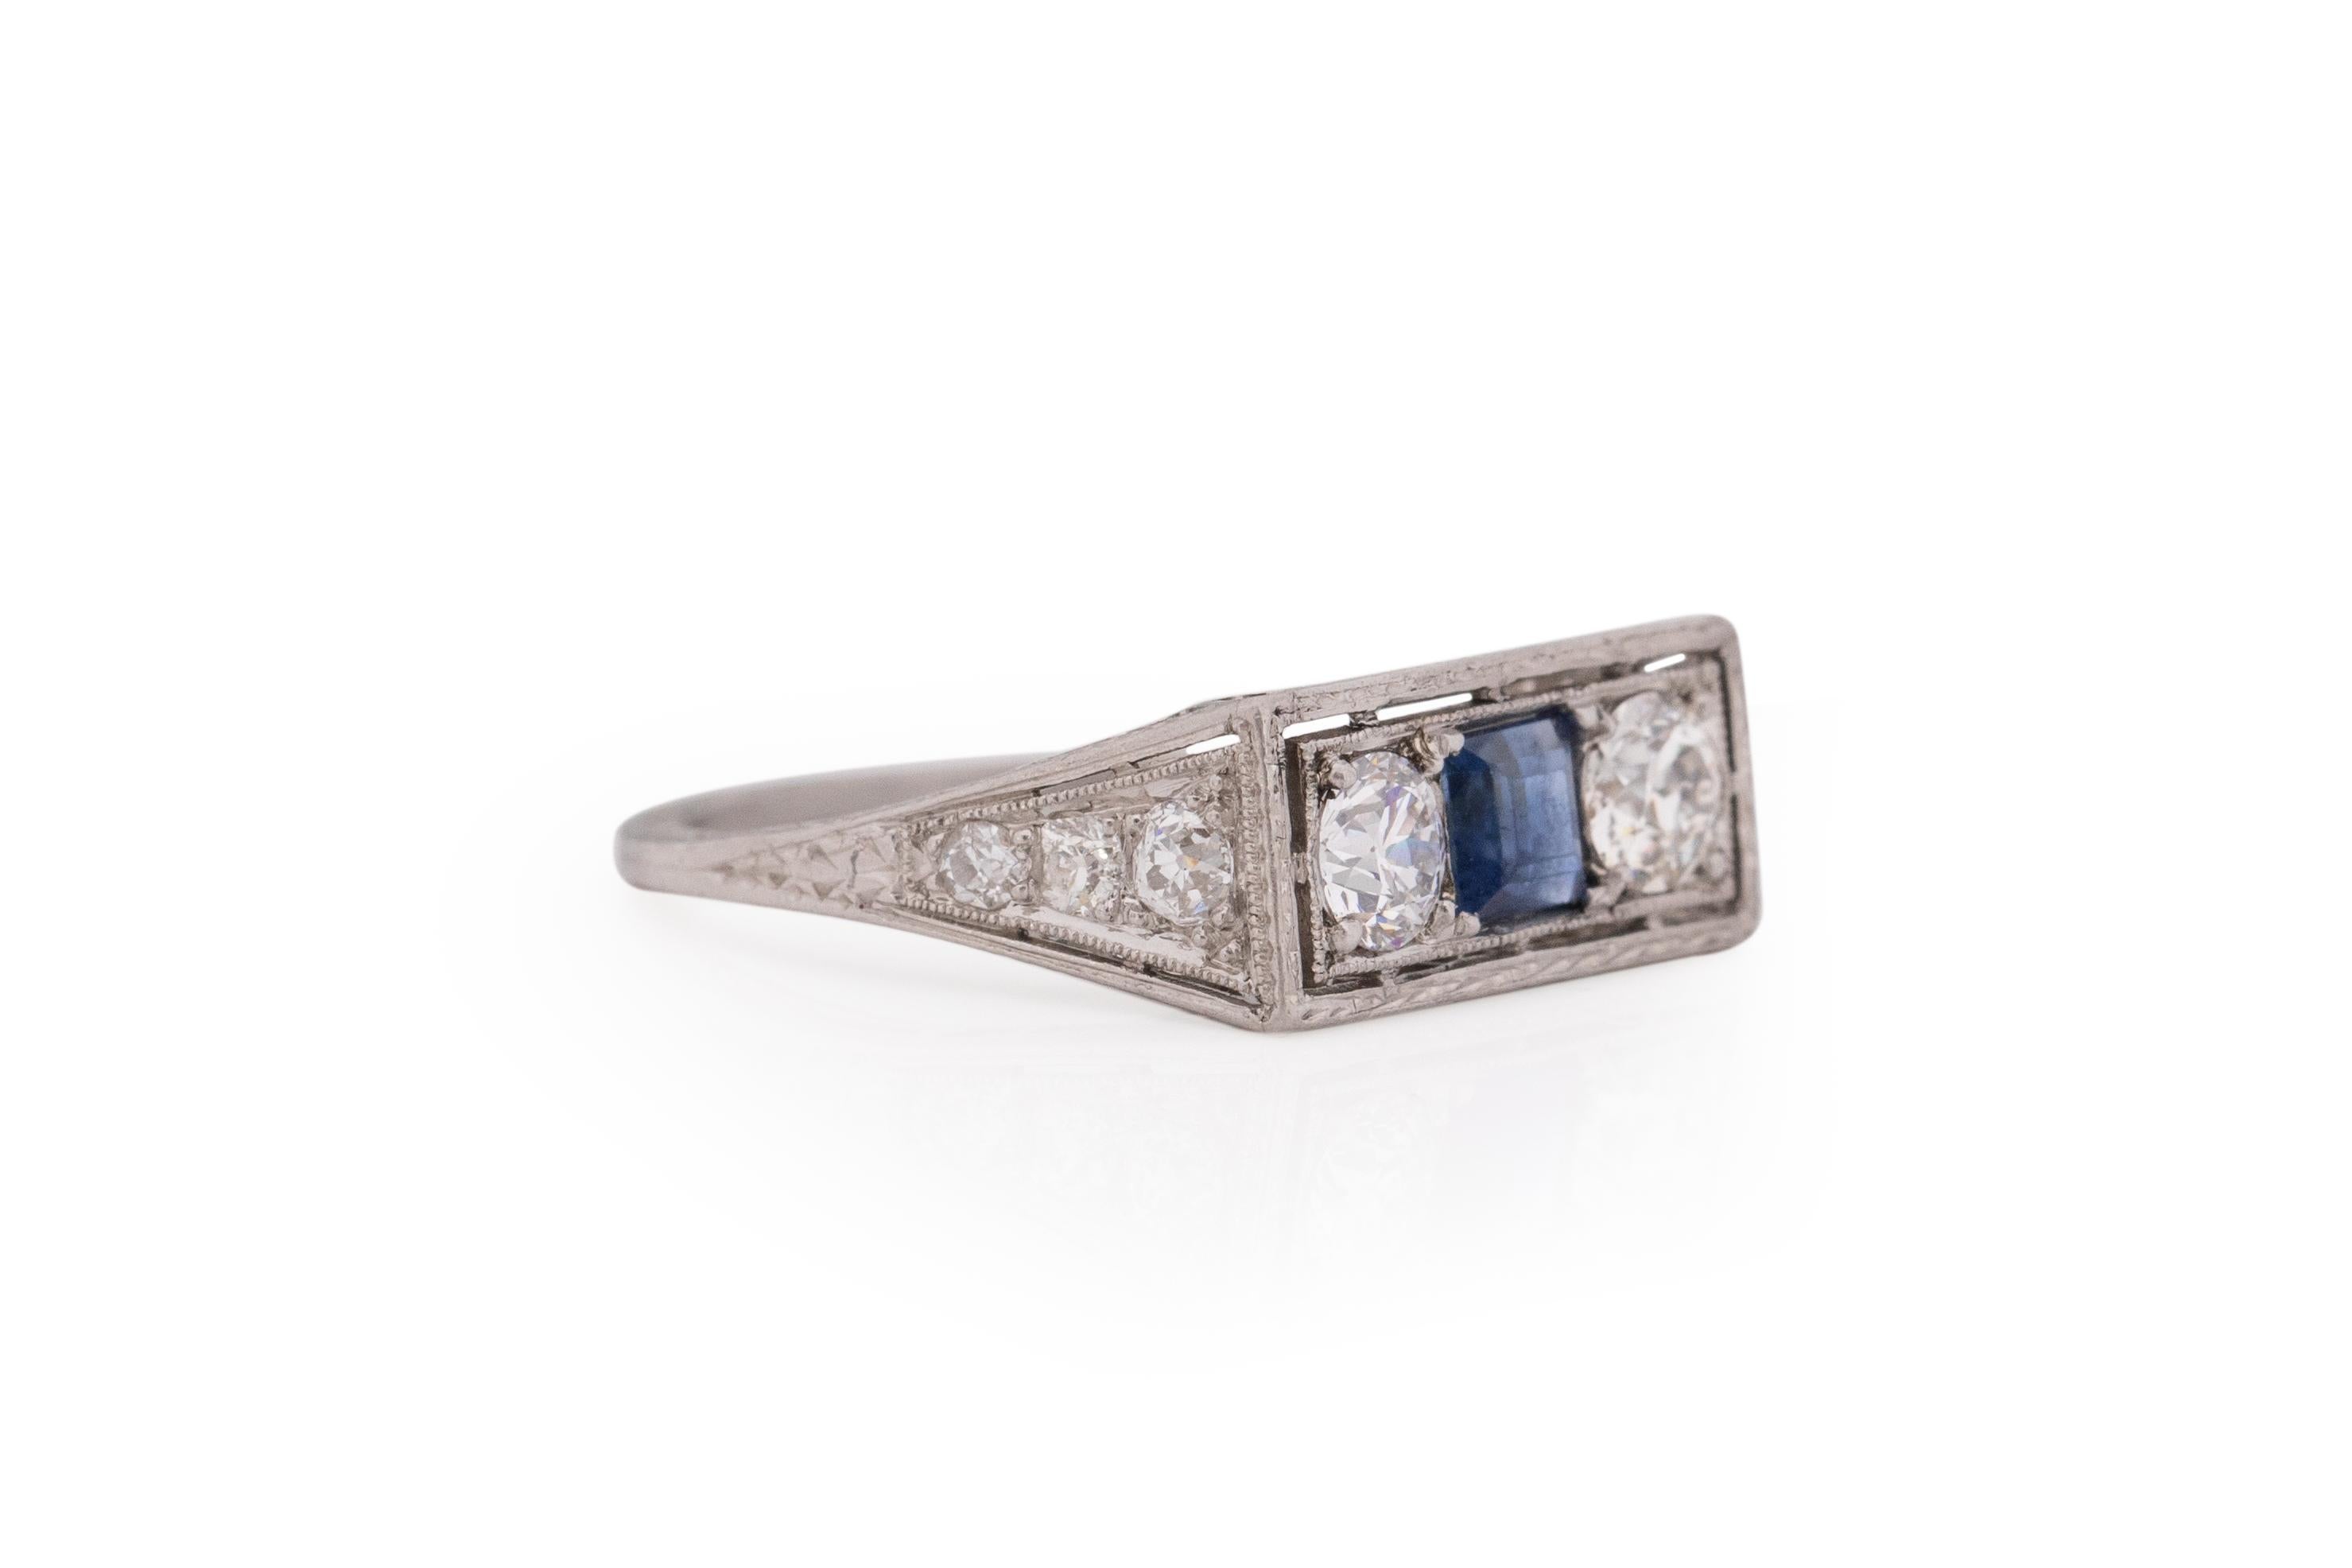 Ring Size: 6.25
Metal Type: Platinum [Hallmarked, and Tested]
Weight: 4.0 grams

Diamond Details:
Weight: .75 carat, total
Cut: Old European brilliant
Color: H
Clarity: VS

Sapphire Details:
Weight: .75 carat
Cut: Square Step Cut
Color: Blue
Type: